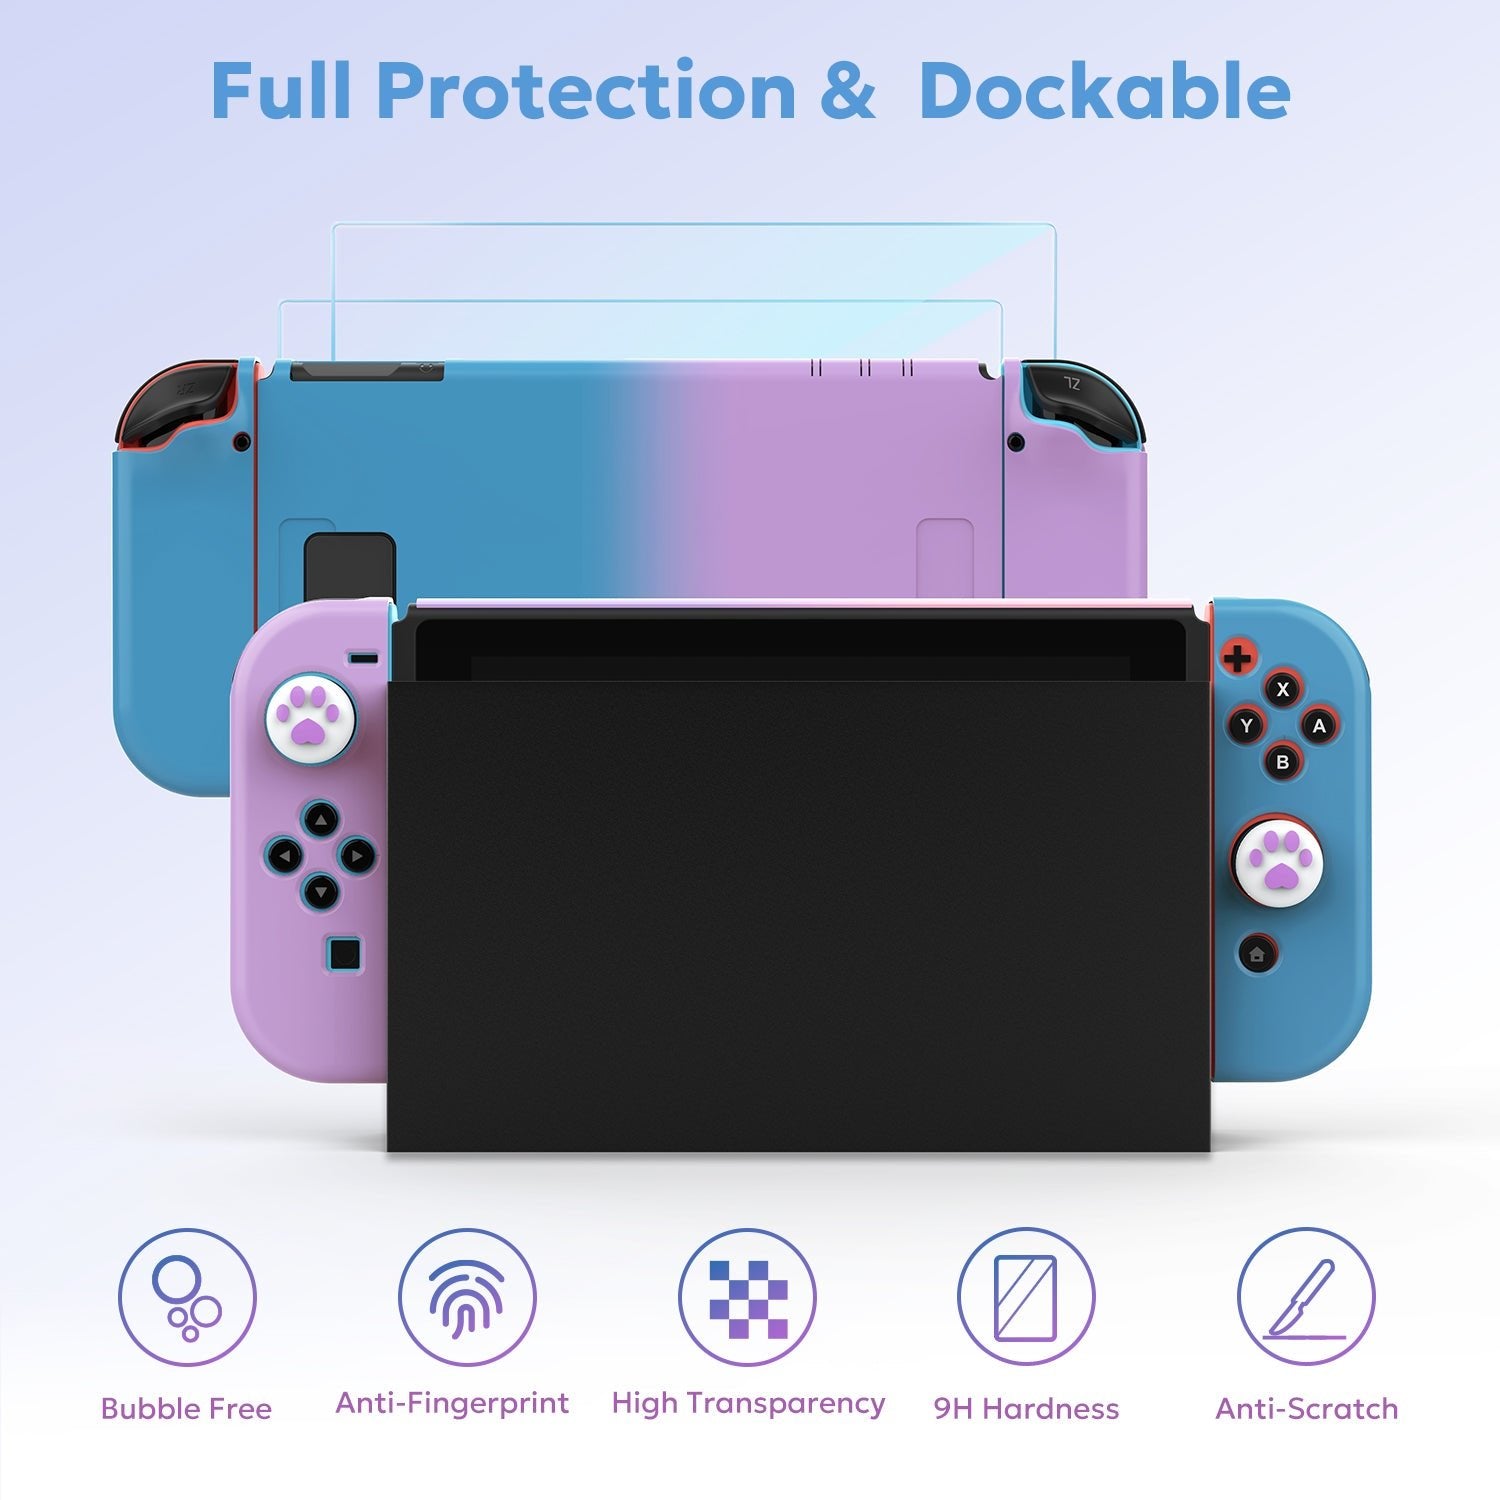 innoAura Nintendo Switch Carrying Case, Gradient Hot Protective Case